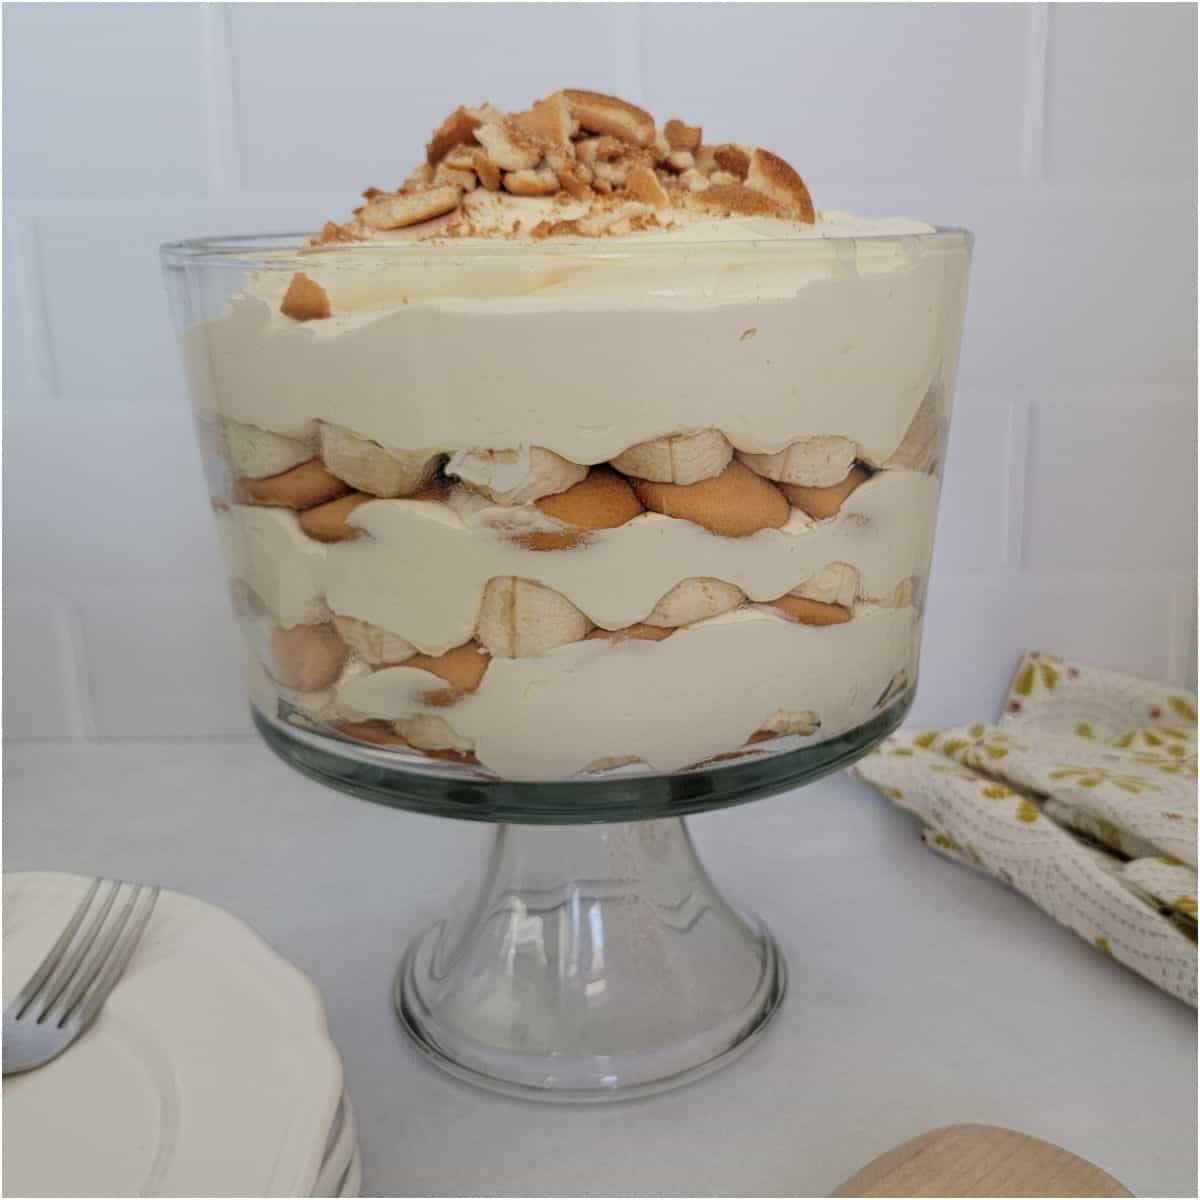 Magnolia Bakery Banana Pudding layered in a large trifle dish next to a stack of plates and cloth napkin